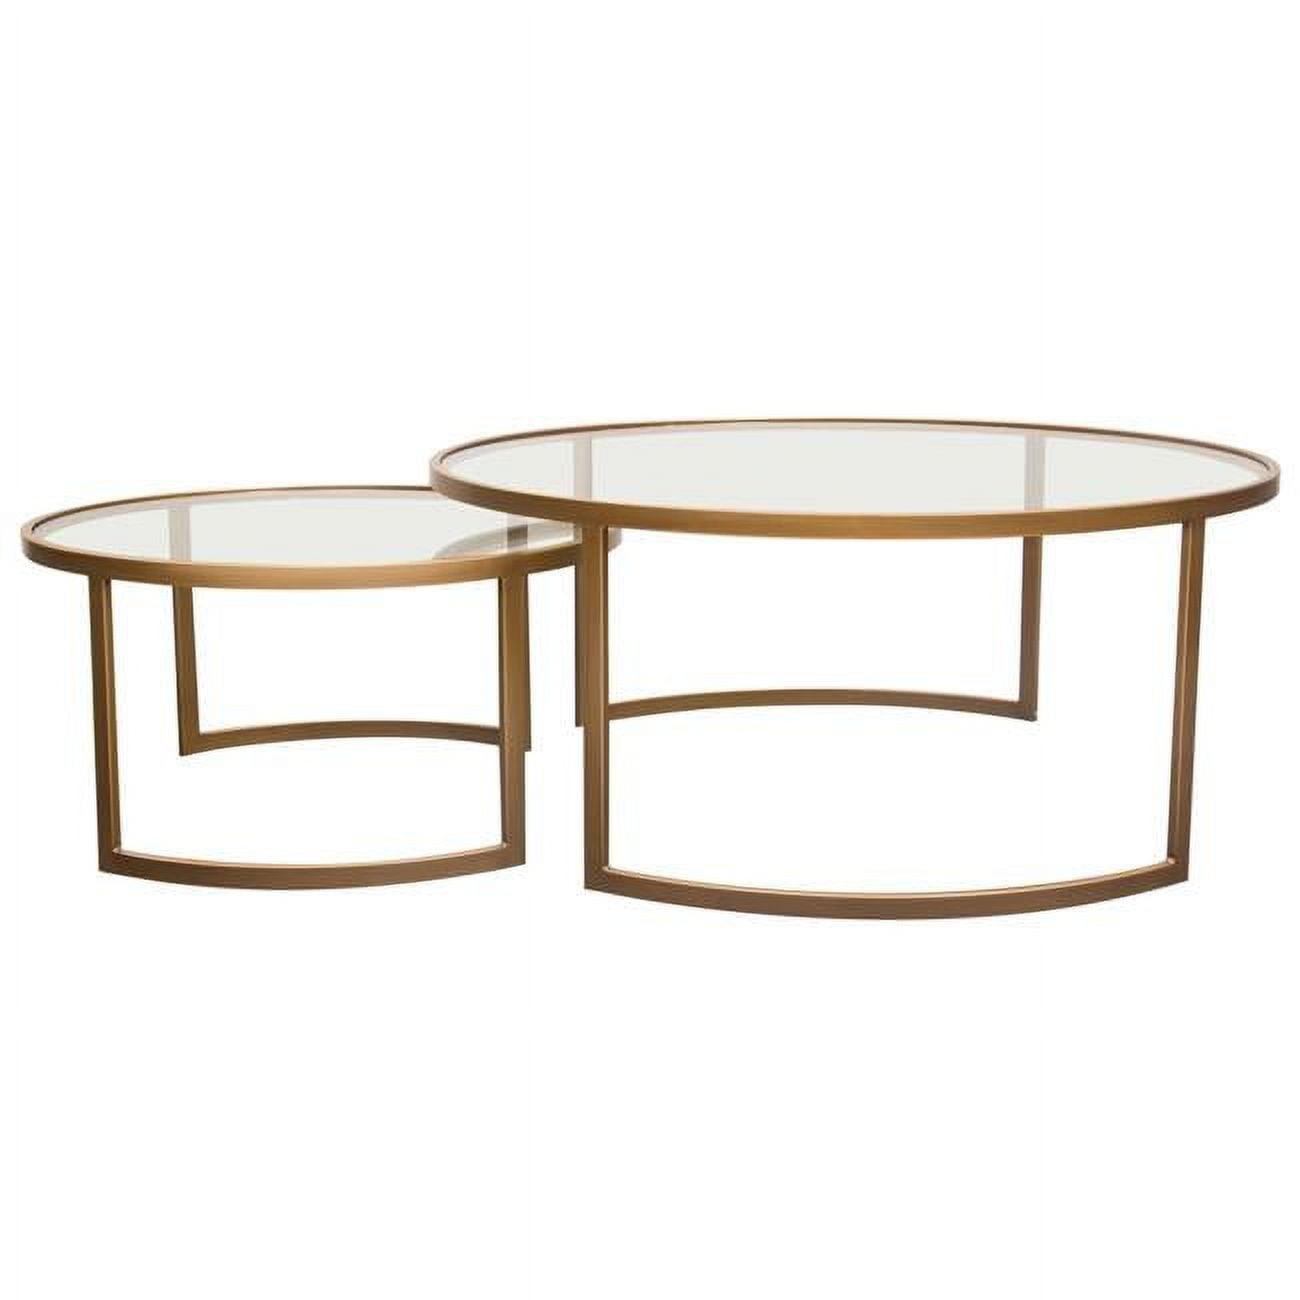 Lane Round Gold Metal Nesting Tables with Glass Tops, 2 Piece Set